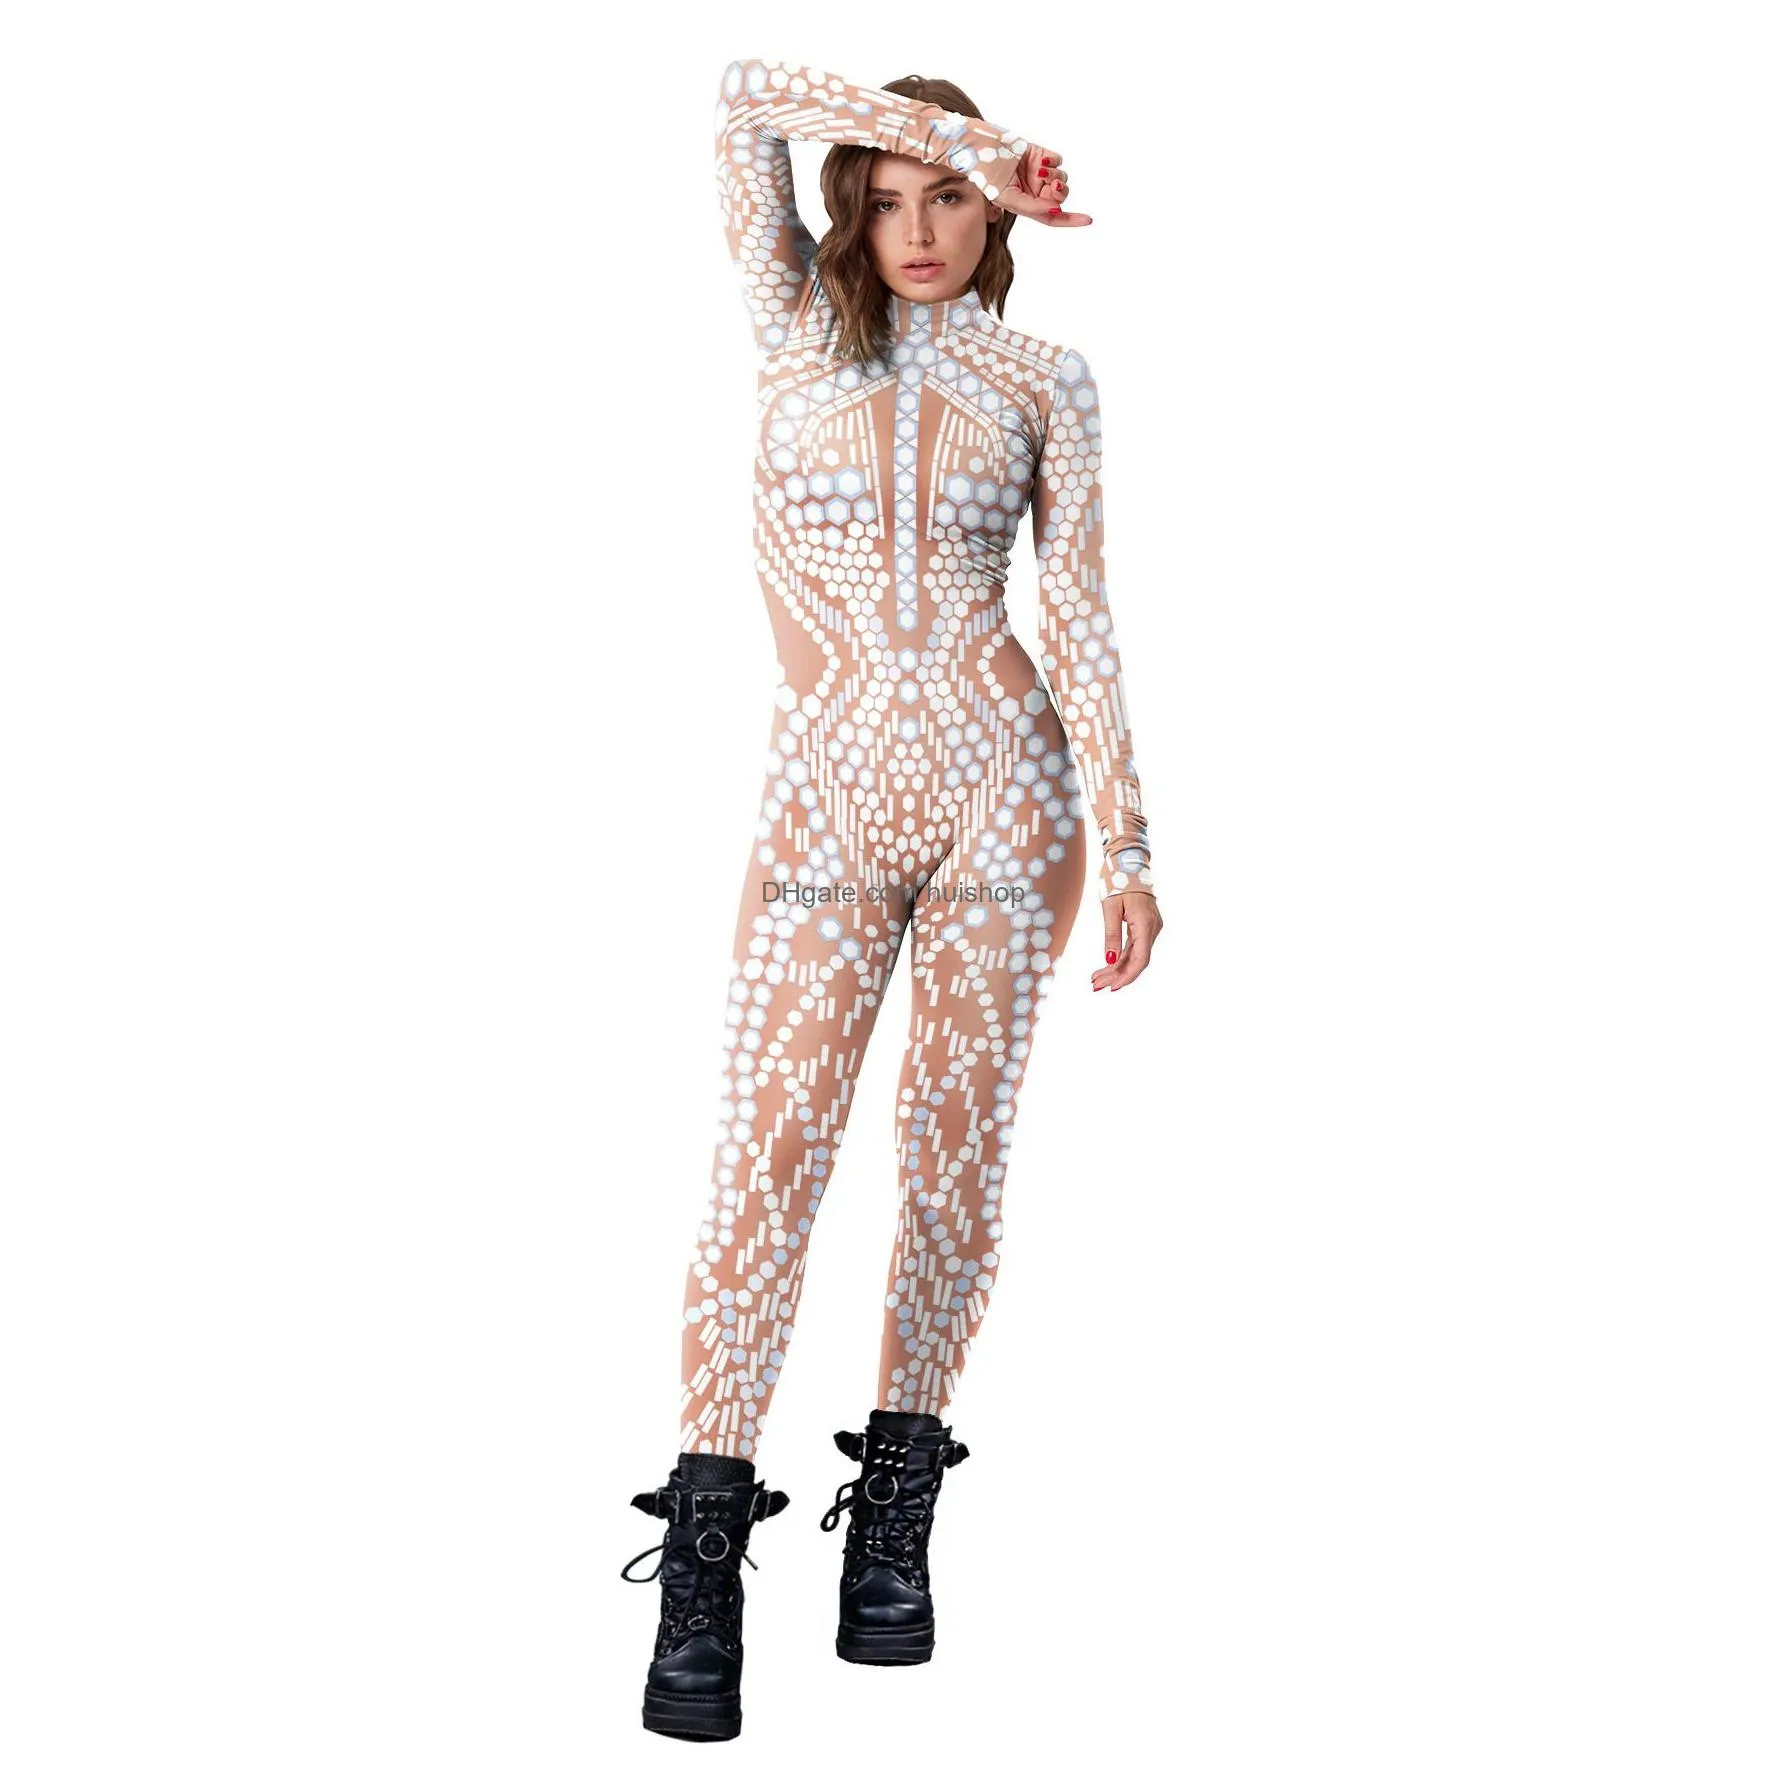 womens jumpsuits women men animals 3d printed jumpsuit adults halloween cosplay costume for dancing party dress up